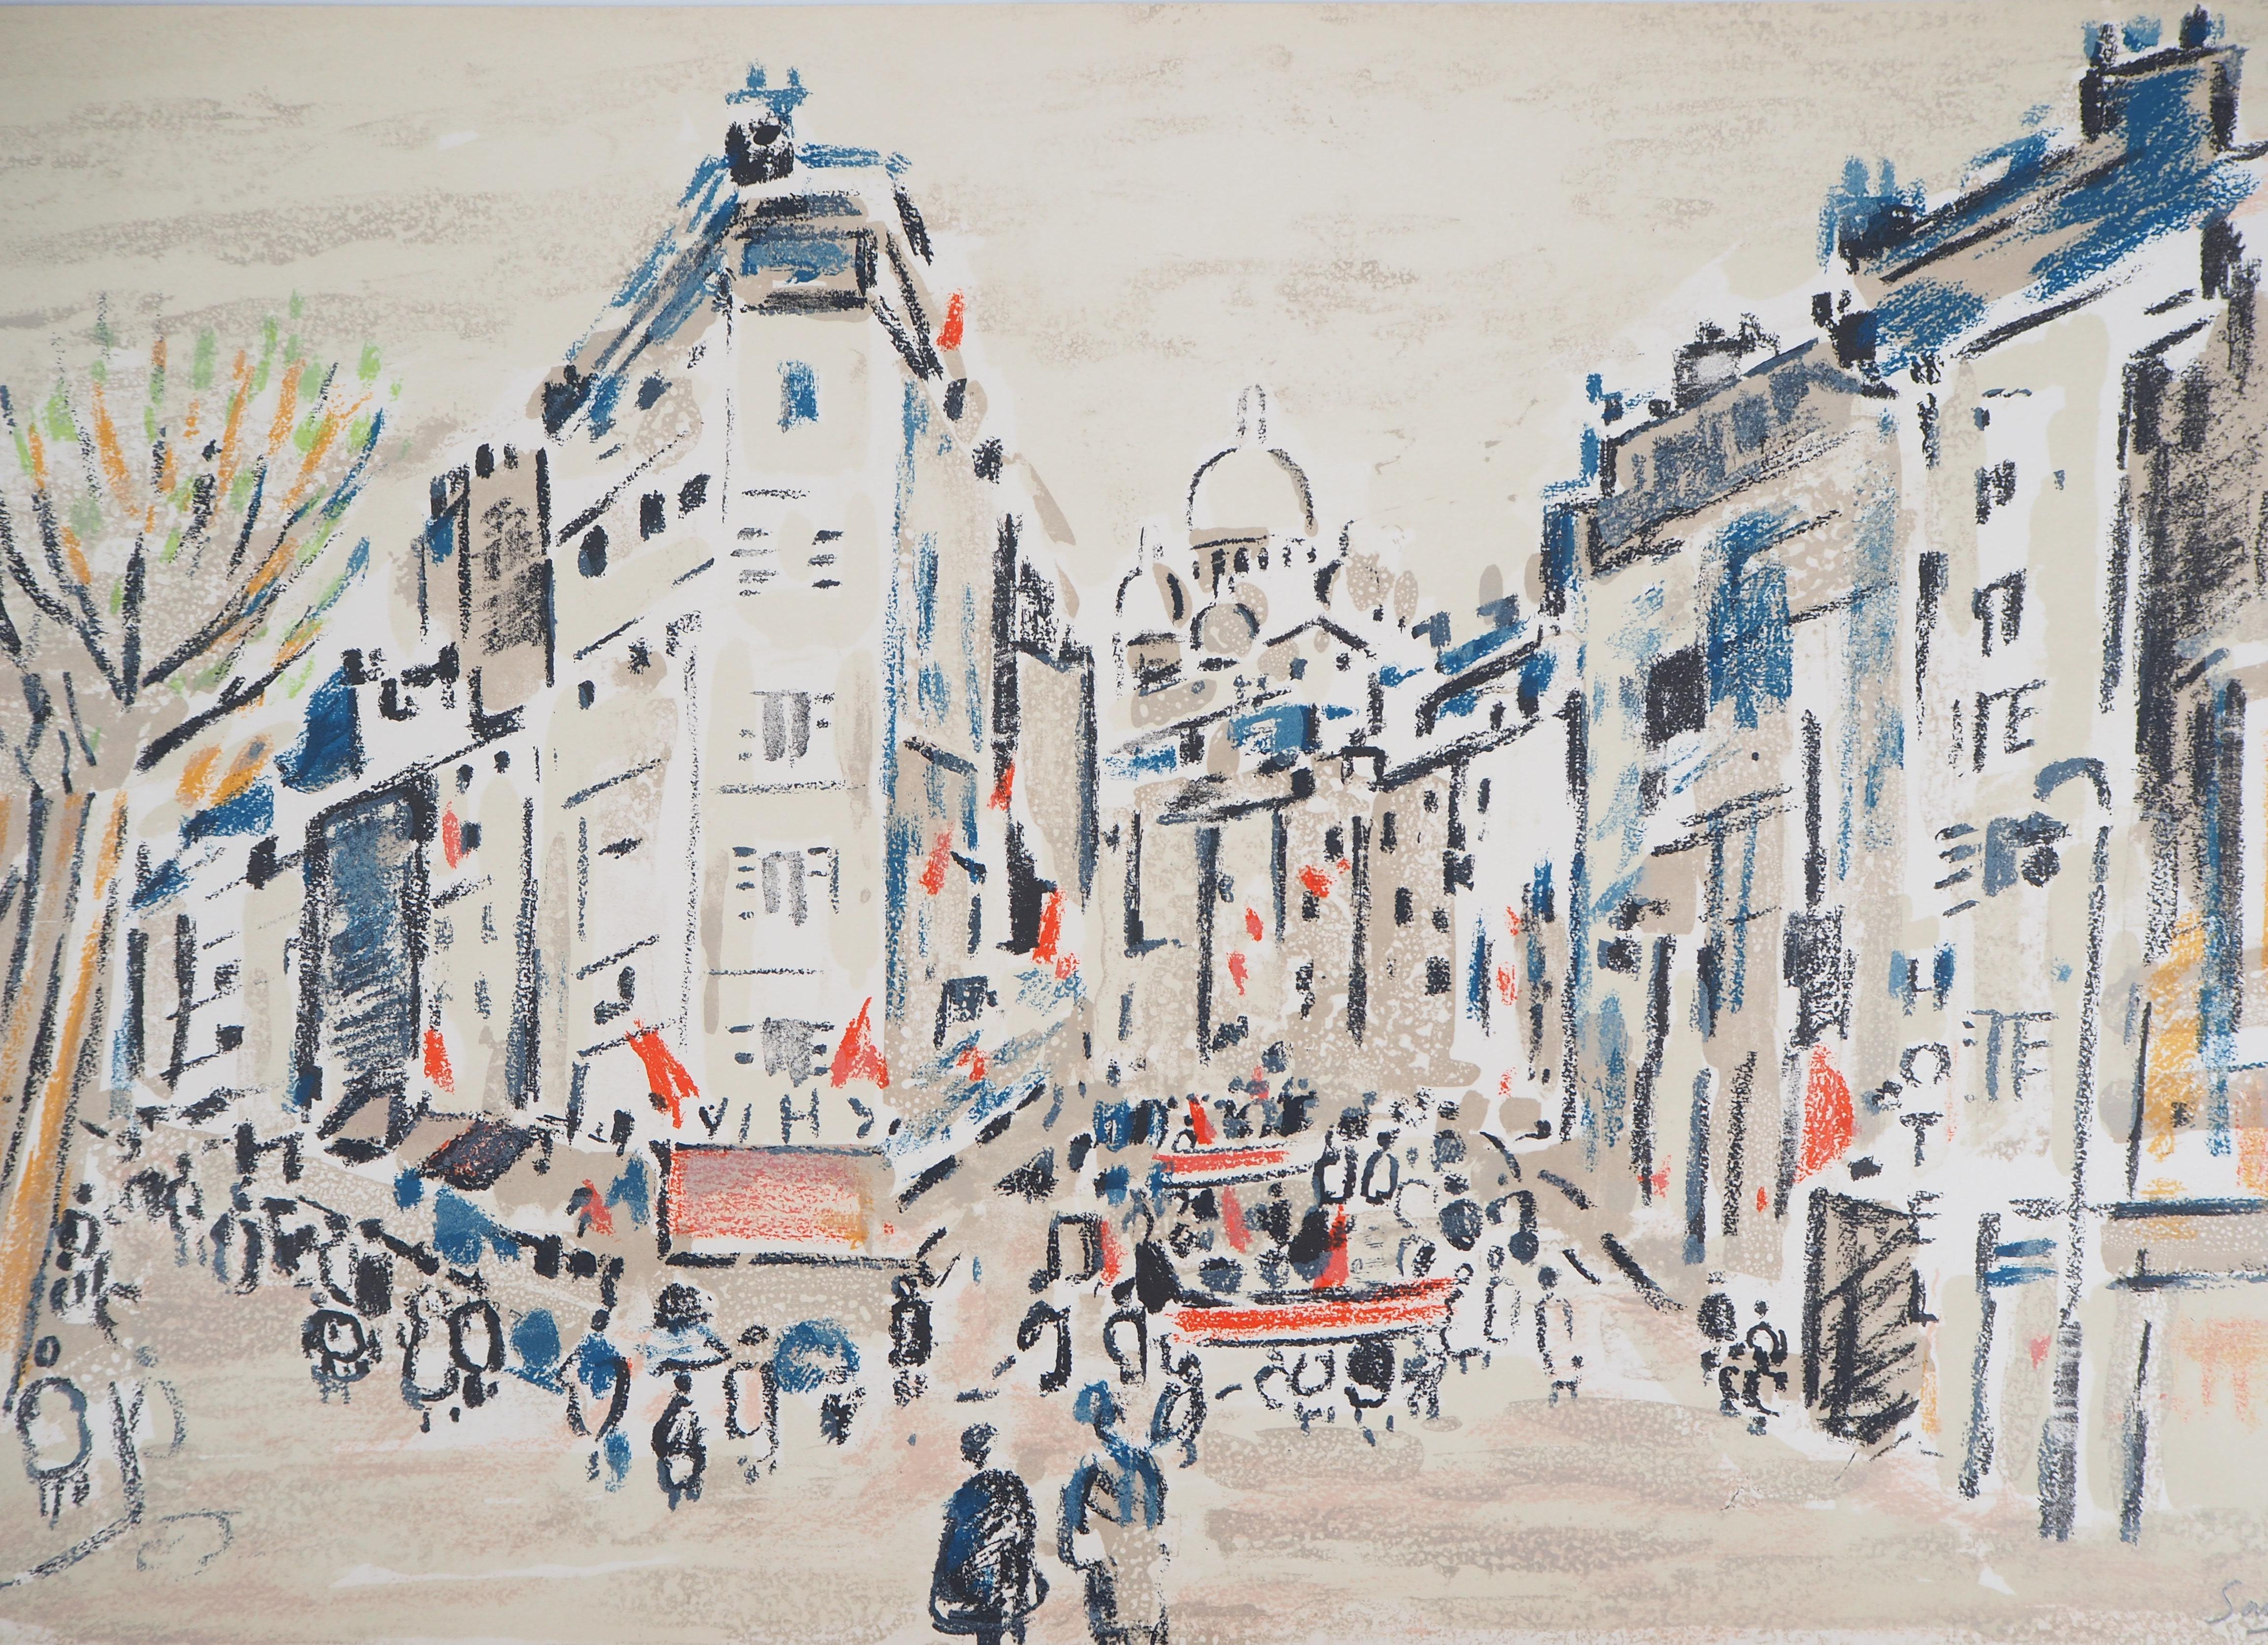 Paris : On the Way to Montmartre - Original Lithograph, Handsigned - Beige Landscape Print by Robert Savary